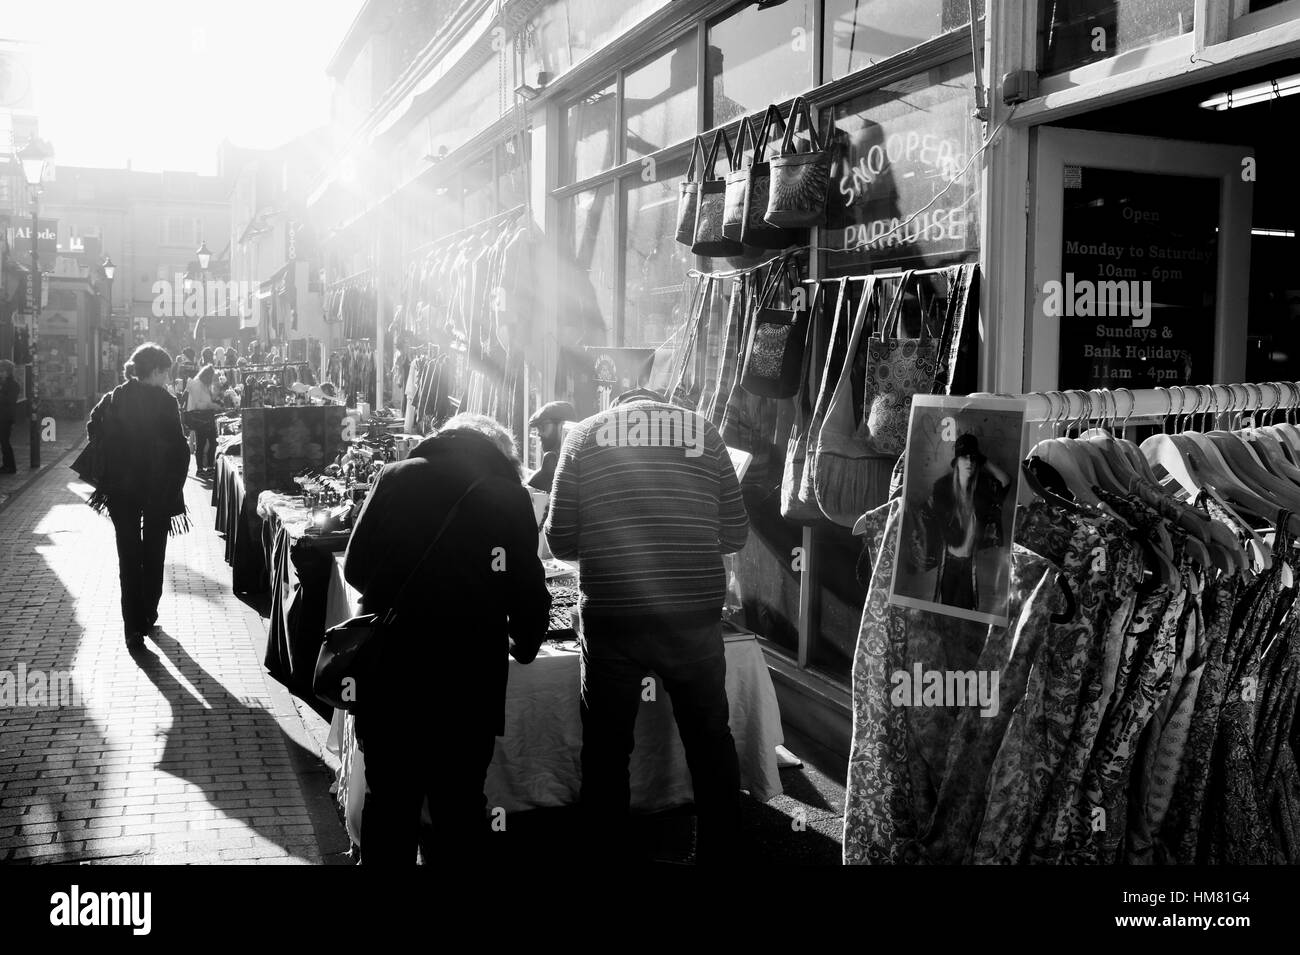 Shoppers browse the market stalls in Kensington Gardens Brighton part of the trendy bohemian North Laine district UK Stock Photo